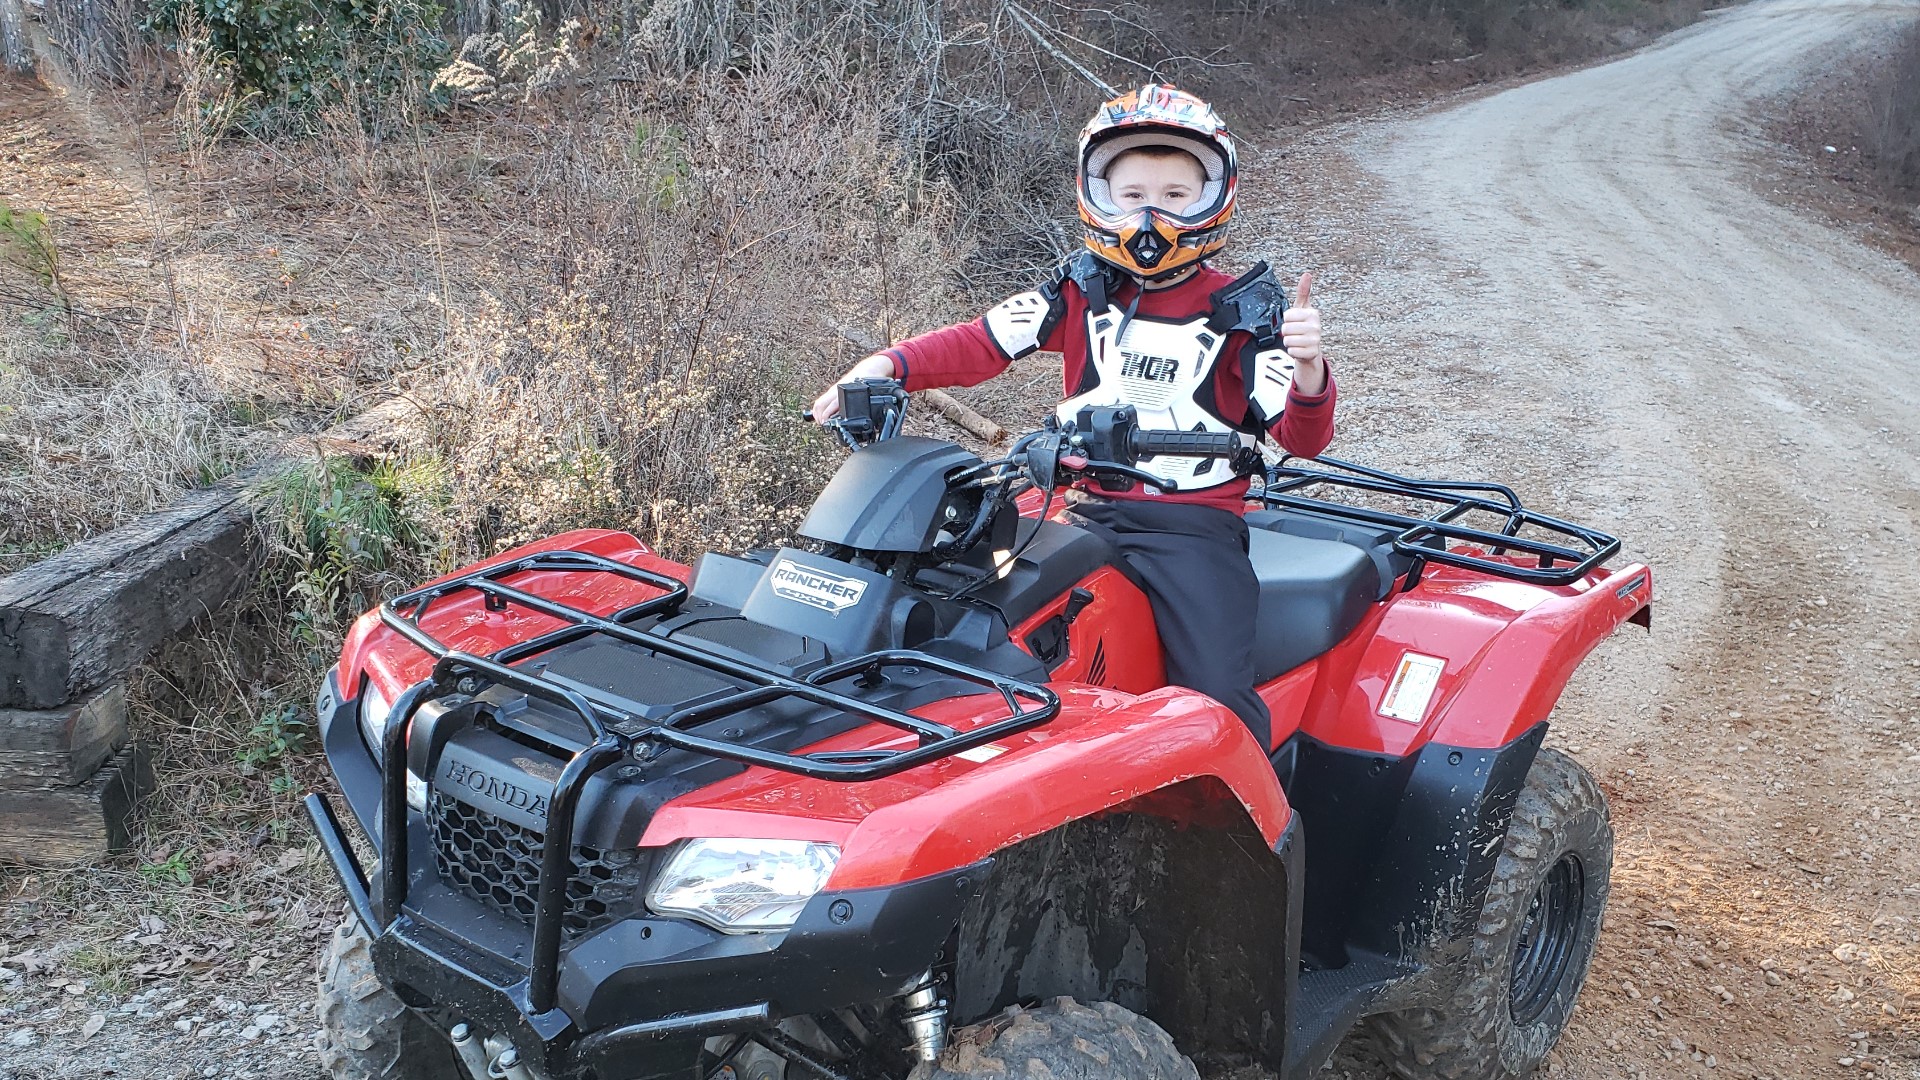 Riding ATVs can be a popular summer activity for older children.